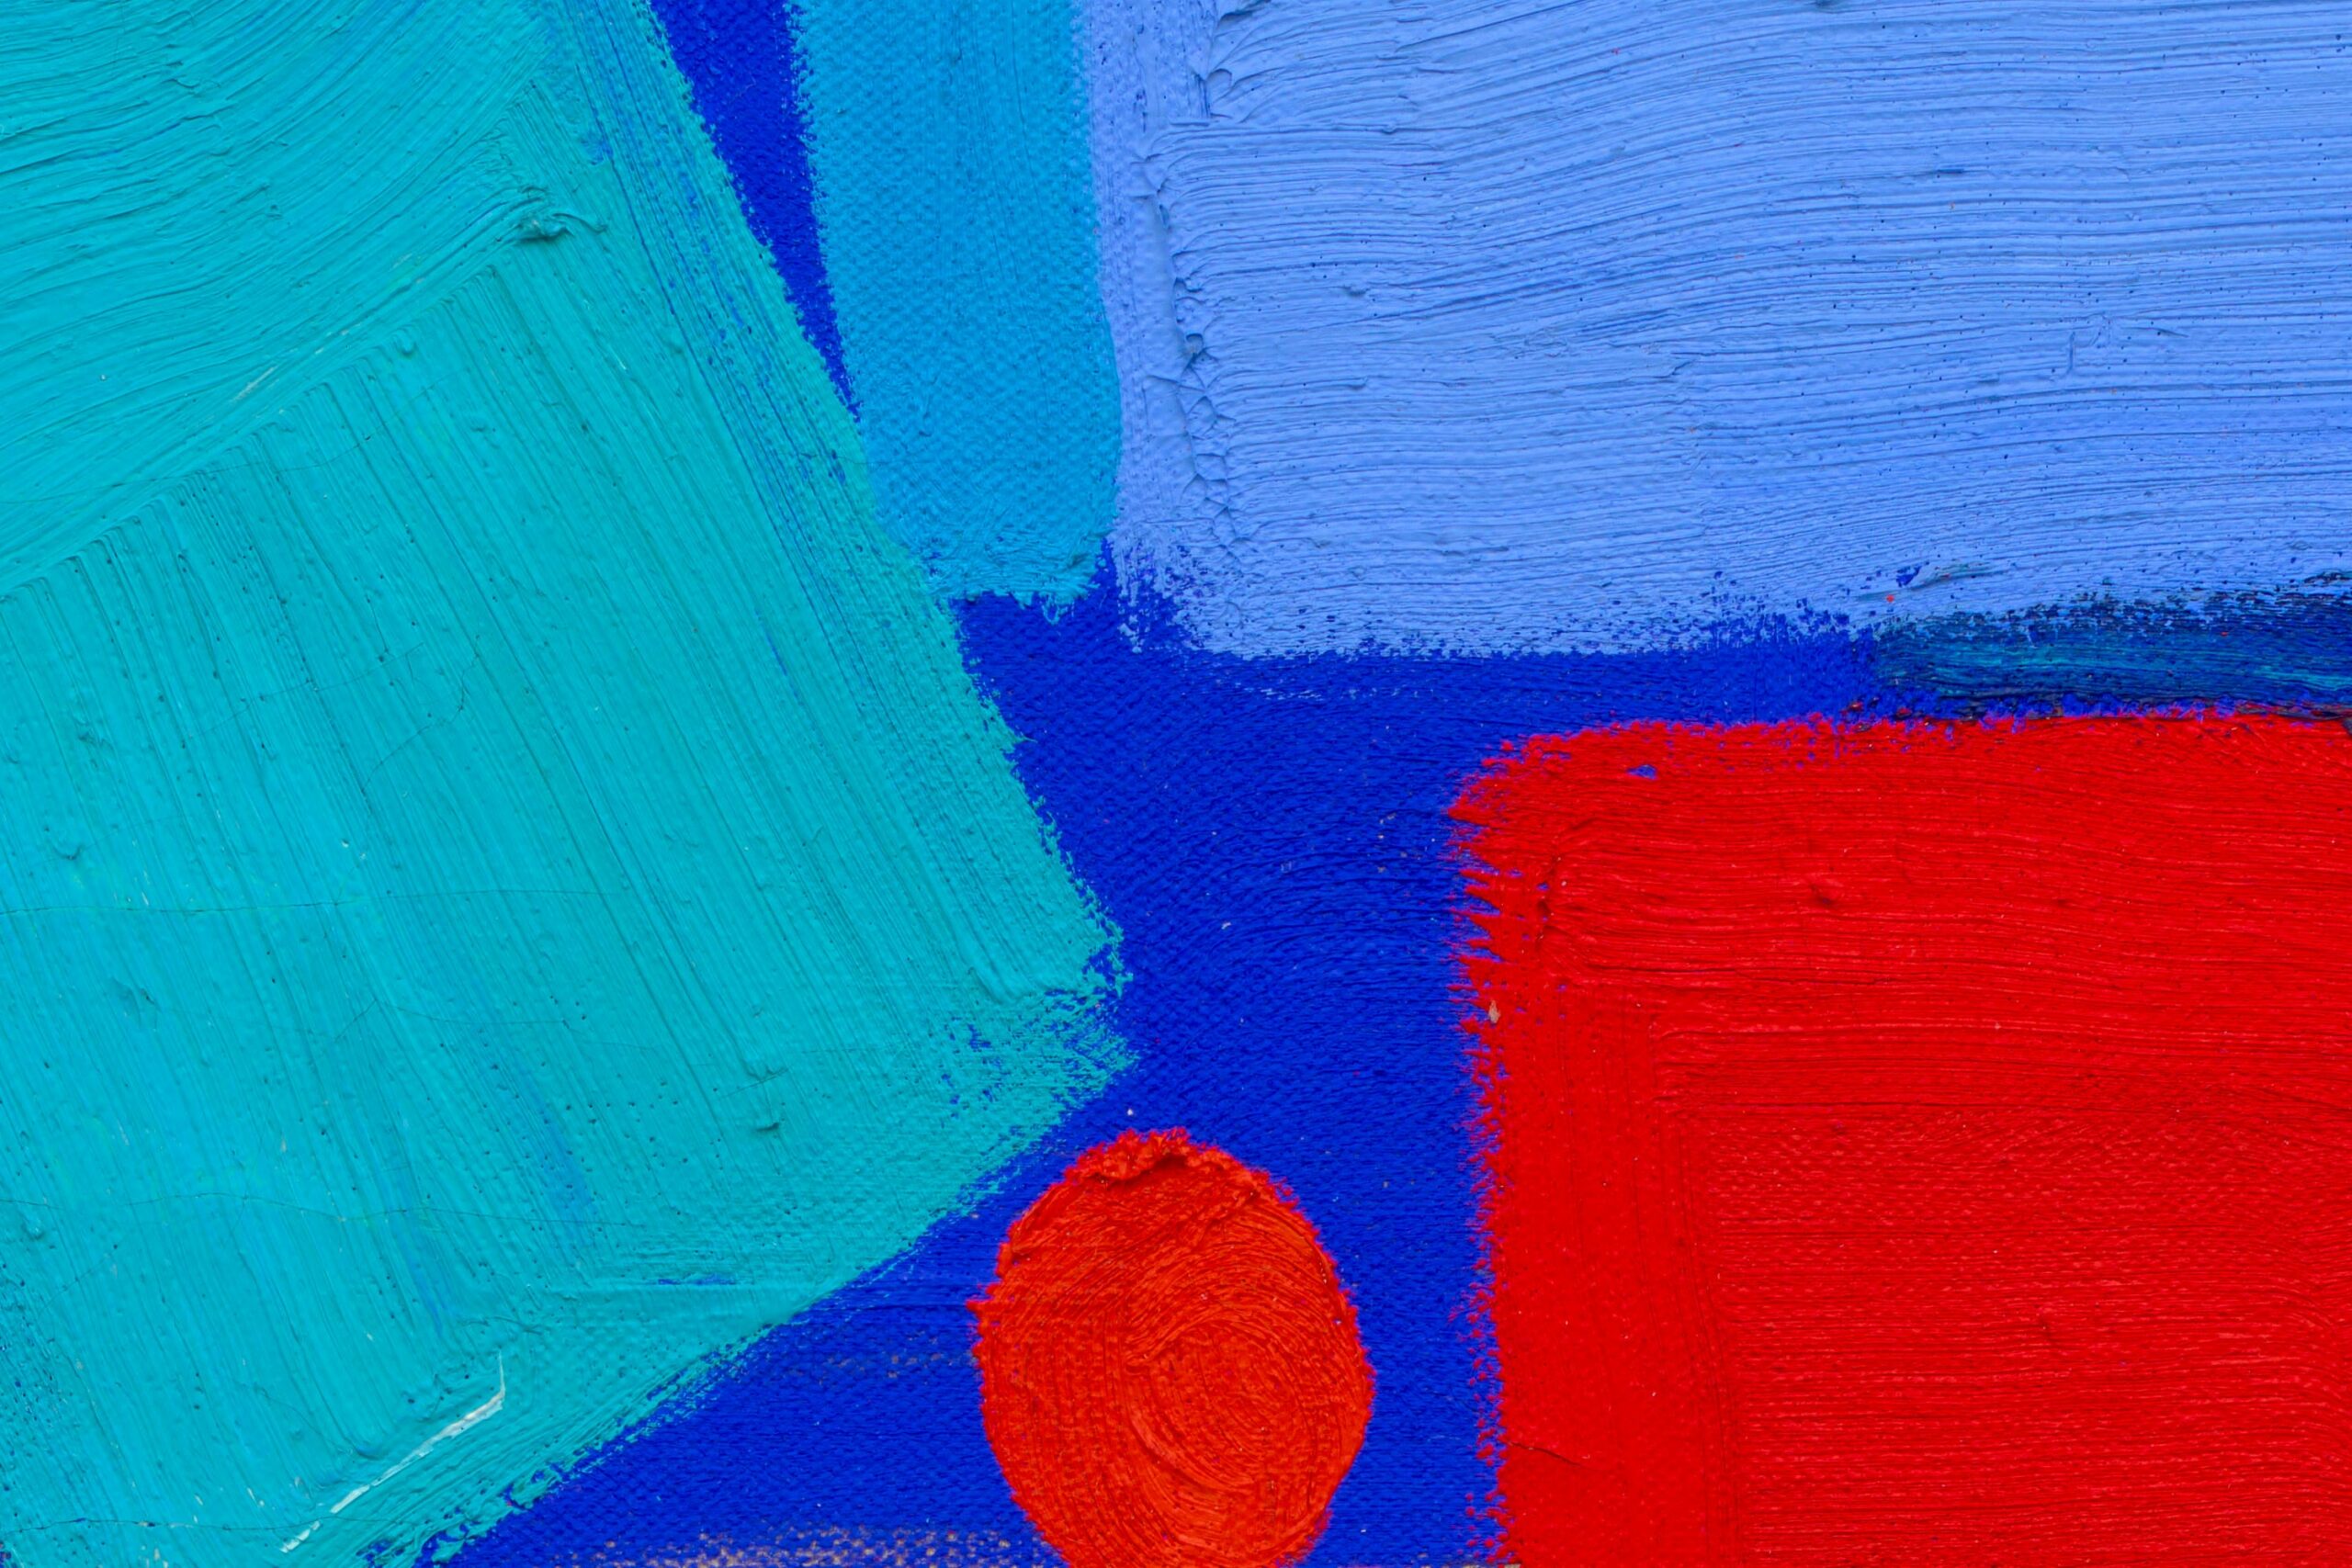 Detail of a painting with colorful red and blue brushstrokes.